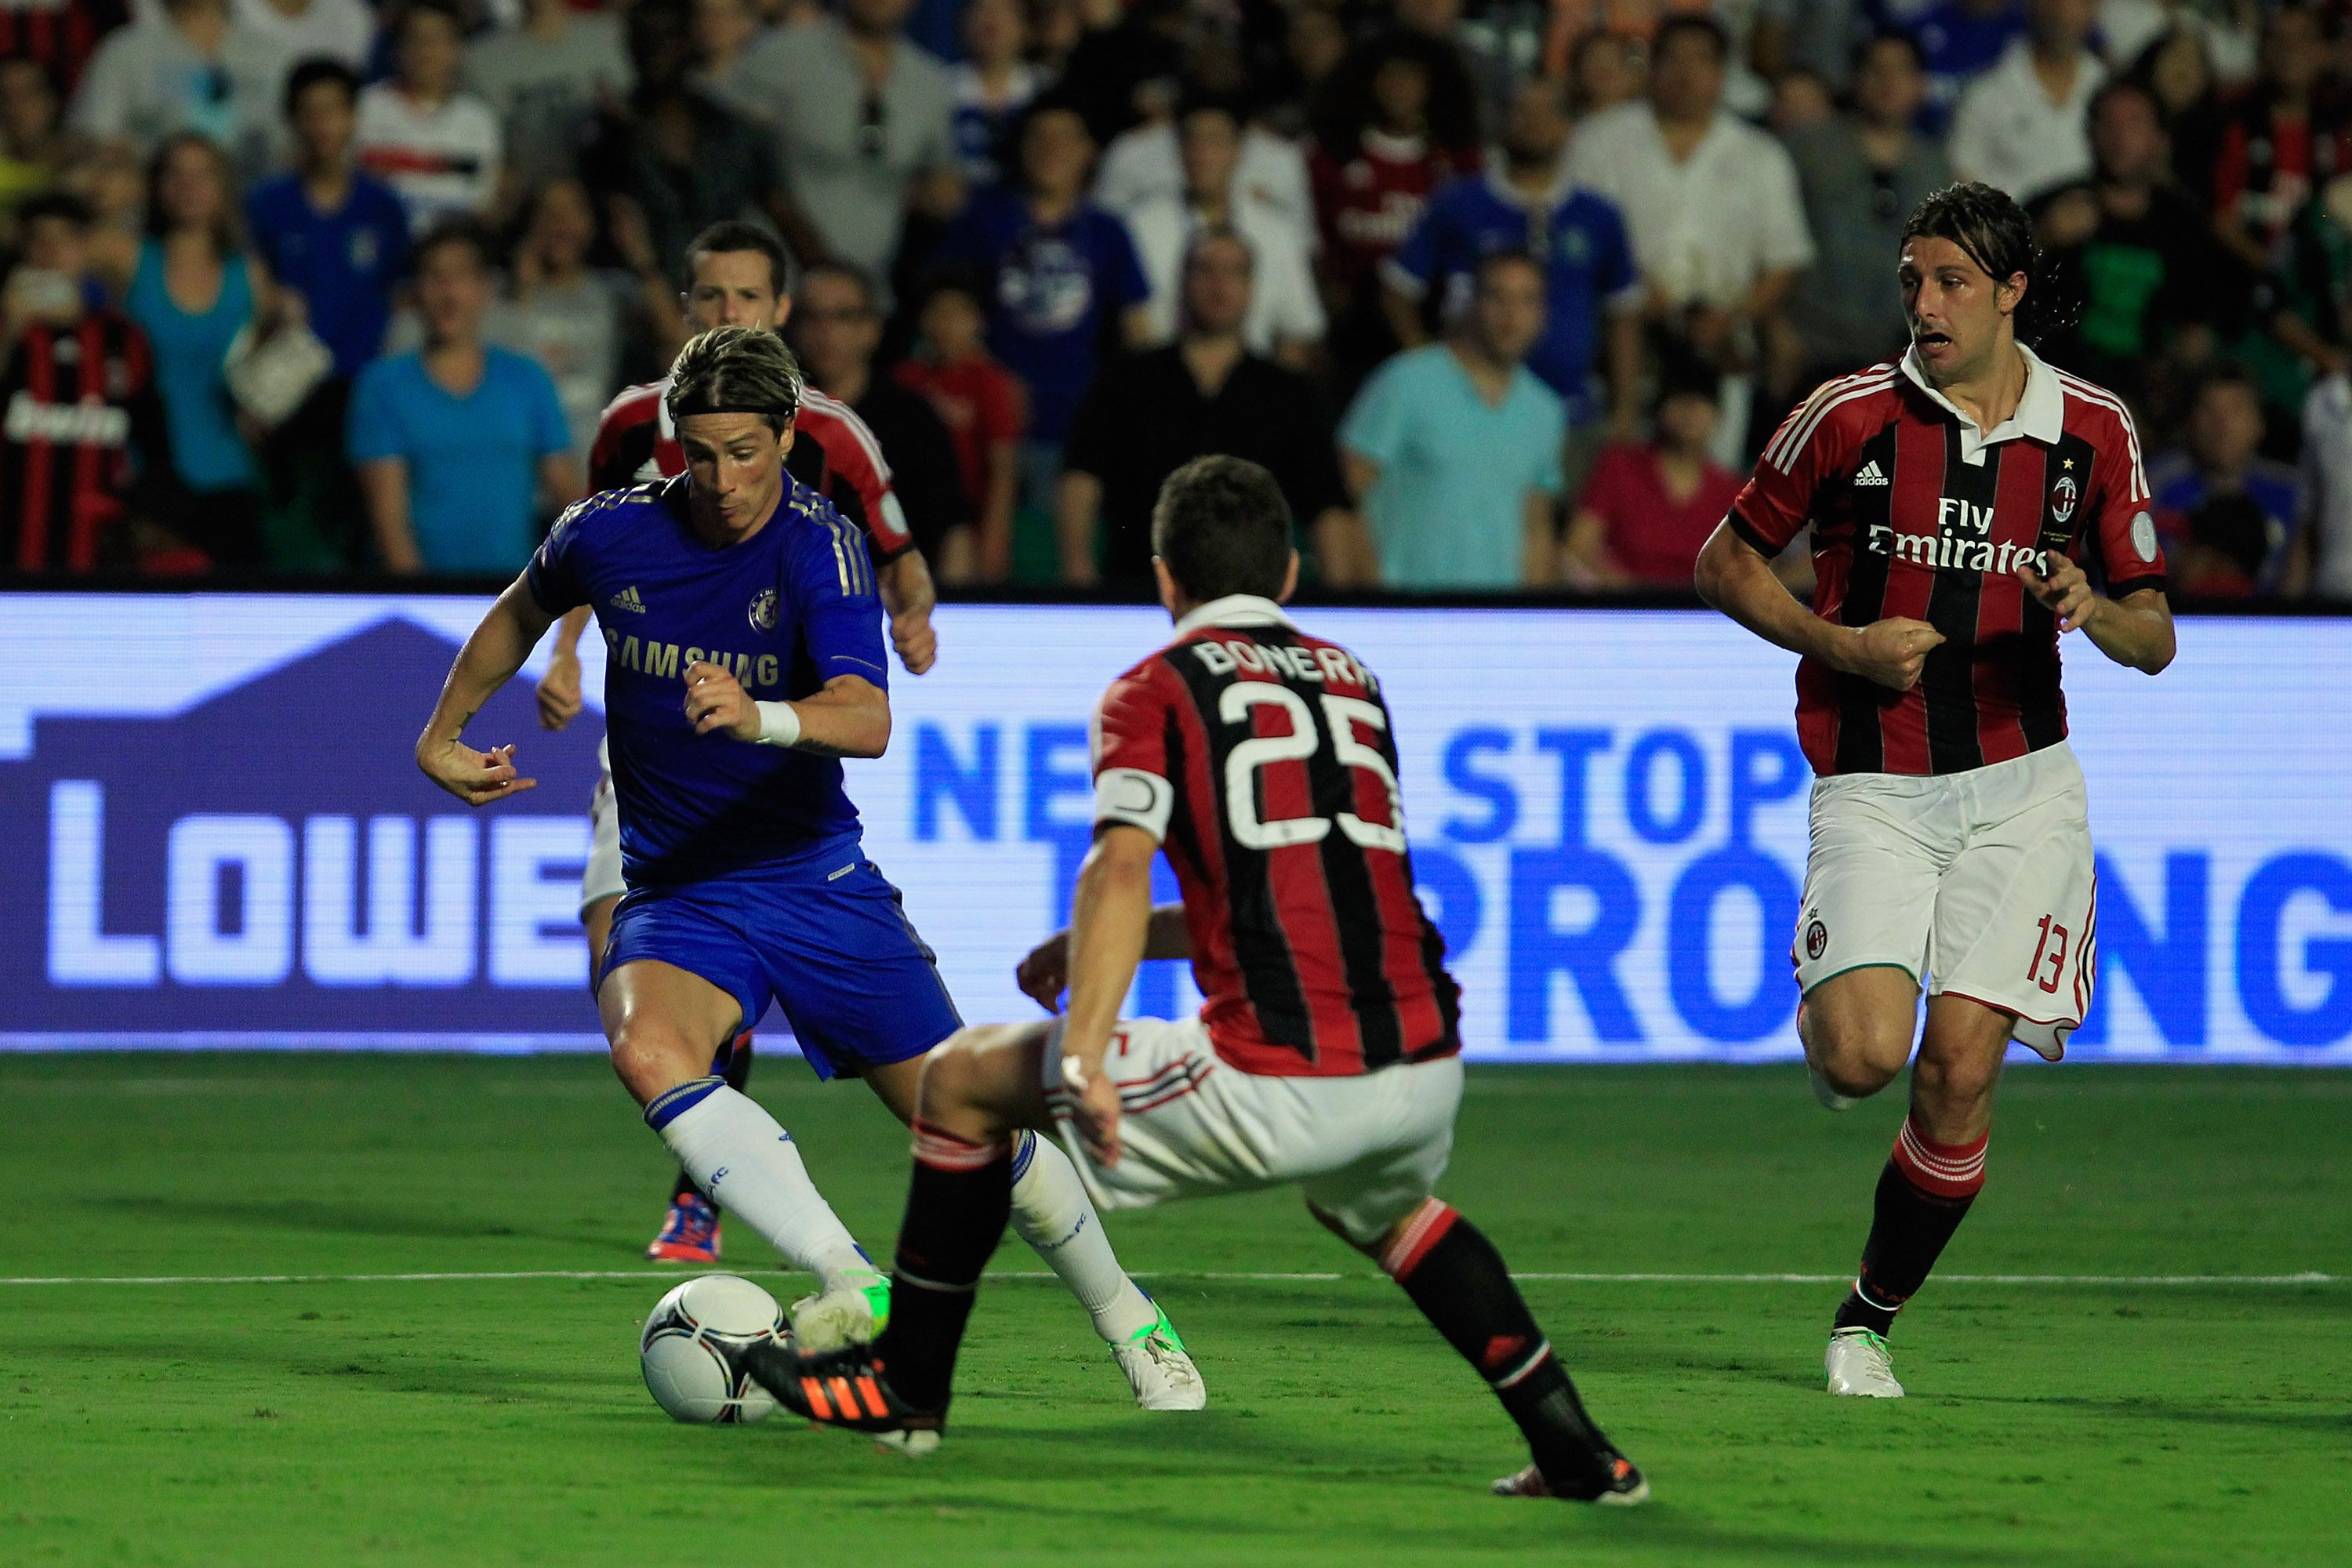 Chelsea crushed AC Milan in the third round of the Champions League